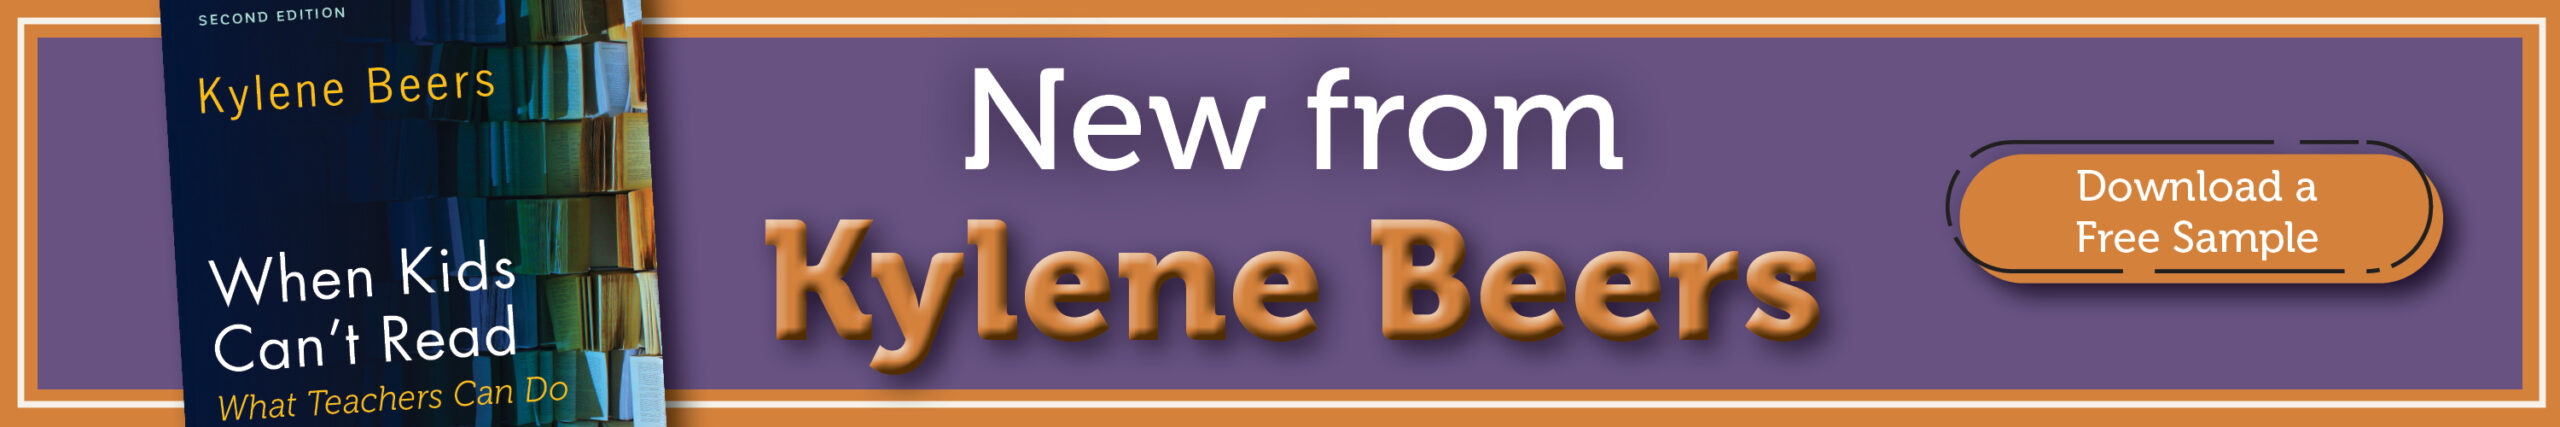 New from Kylene Beers! Download a sample